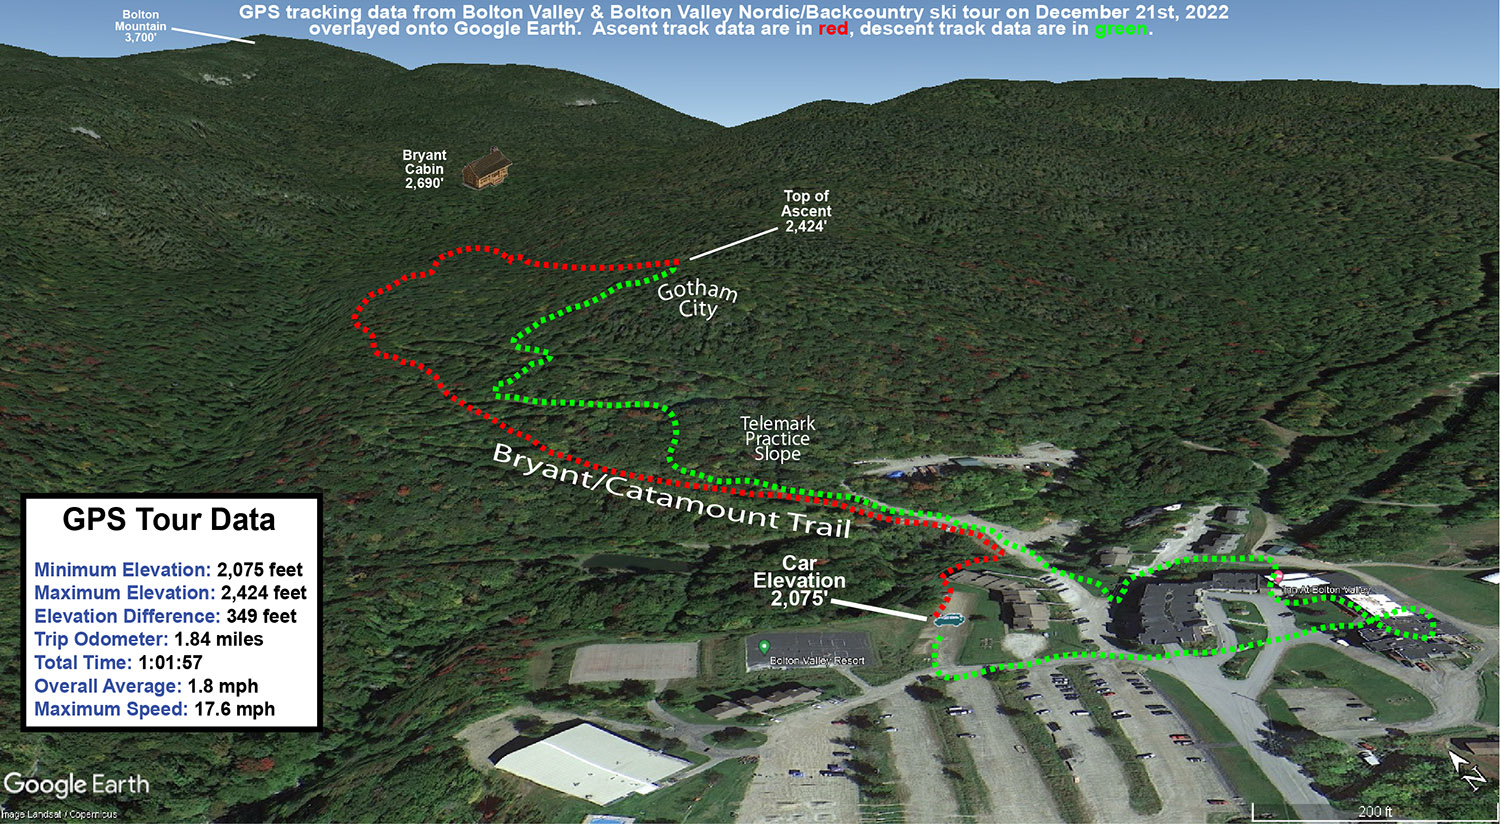 A Google Earth map with GPS tracking data from a ski tour on the Nordic and Backcountry Network at Bolton Valley Ski Resort in Vermont on December 21st, 2022